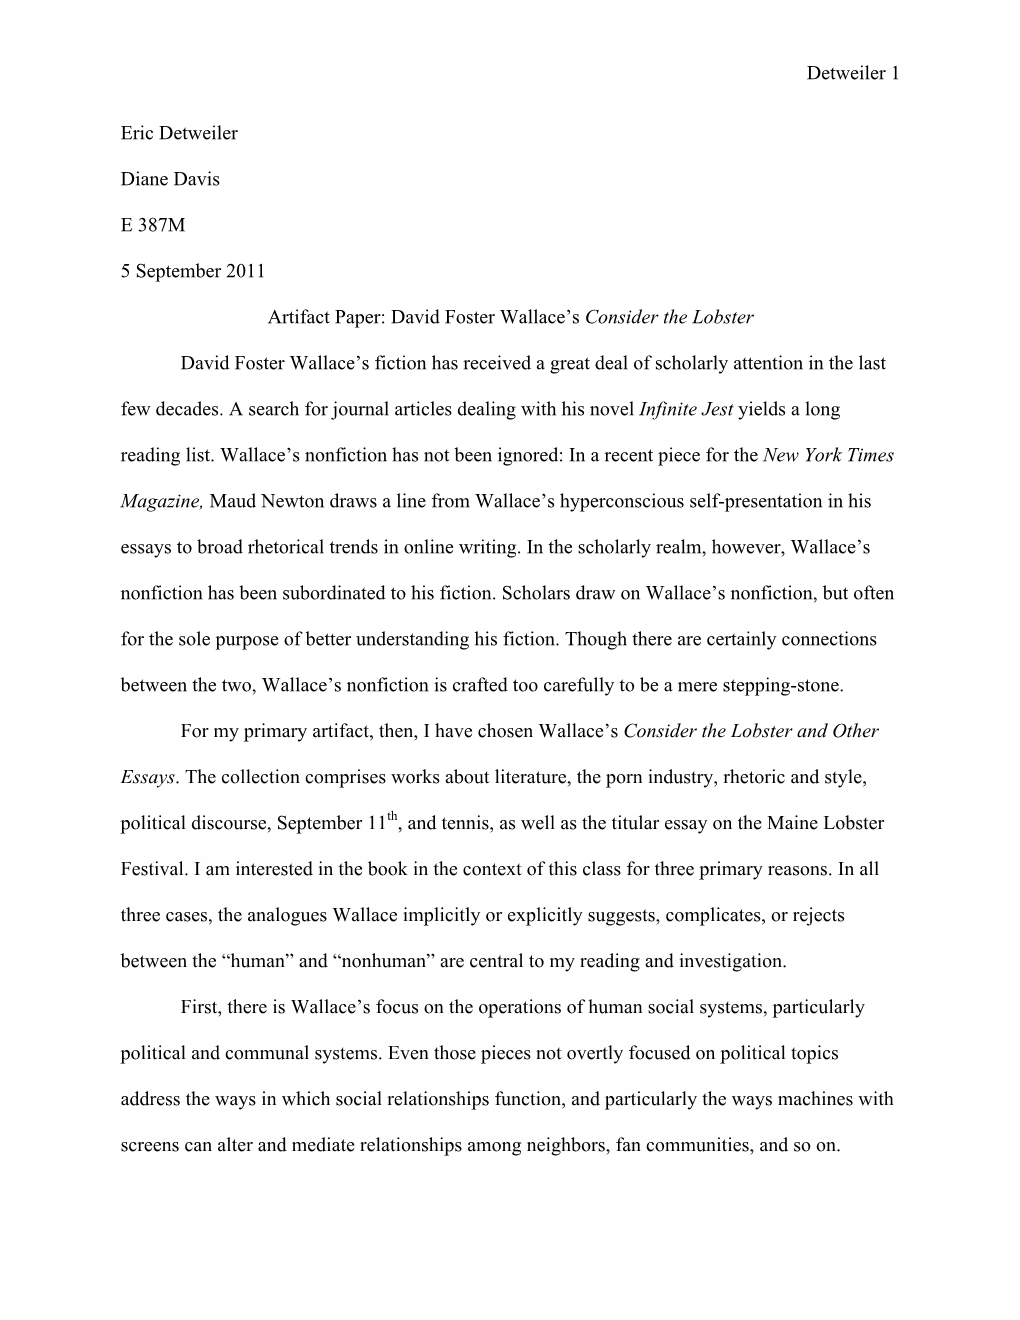 Artifact Paper: David Foster Wallace’S Consider the Lobster